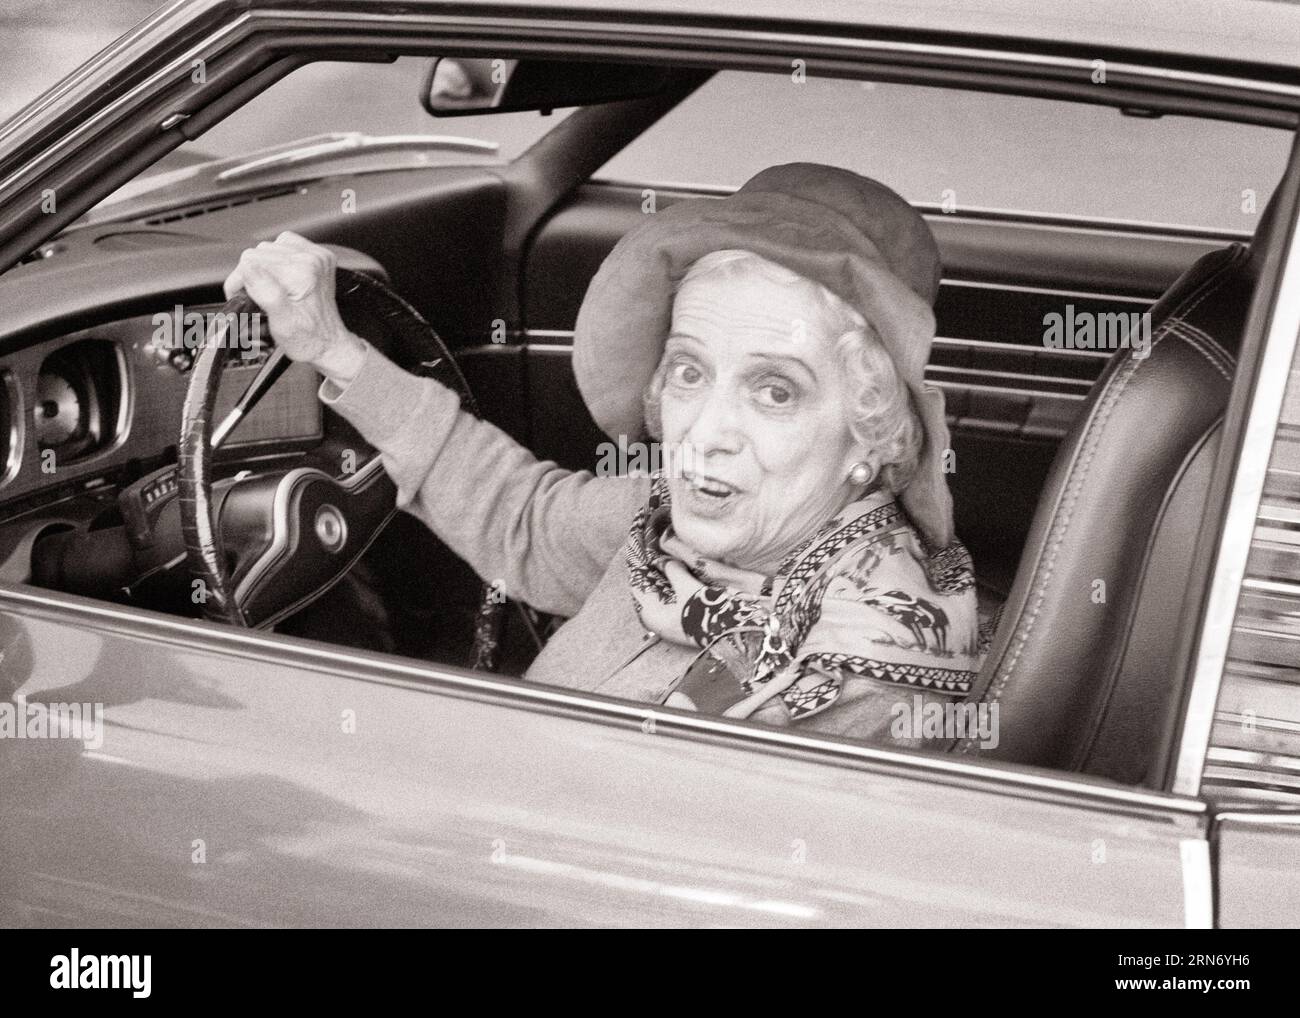 1970s SENIOR WOMAN SITTING IN DRIVER’S SEAT OF CAR LOOKING OUT THE WINDOW AT CAMERA - m9622 HAR001 HARS COMMUNICATION VEHICLE SAFETY FASHIONABLE LIFESTYLE ELDER FEMALES COPY SPACE LADIES PERSONS INSPIRATION AUTOMOBILE CHARACTER DRIVERS CONFIDENCE TRANSPORTATION SENIOR ADULT B&W WIDE EYE CONTACT SENIOR WOMAN BUG-EYED OLD AGE OLDSTERS HEAD AND SHOULDERS HIGH ANGLE OLDSTER ADVENTURE STYLES AUTOS PRIDE ELDERS AUTOMOBILES STYLISH VEHICLES DRIVER'S WIDE-EYED ELDERLY WOMAN FASHIONS STARTLED BLACK AND WHITE CAUCASIAN ETHNICITY HAR001 OLD FASHIONED Stock Photo